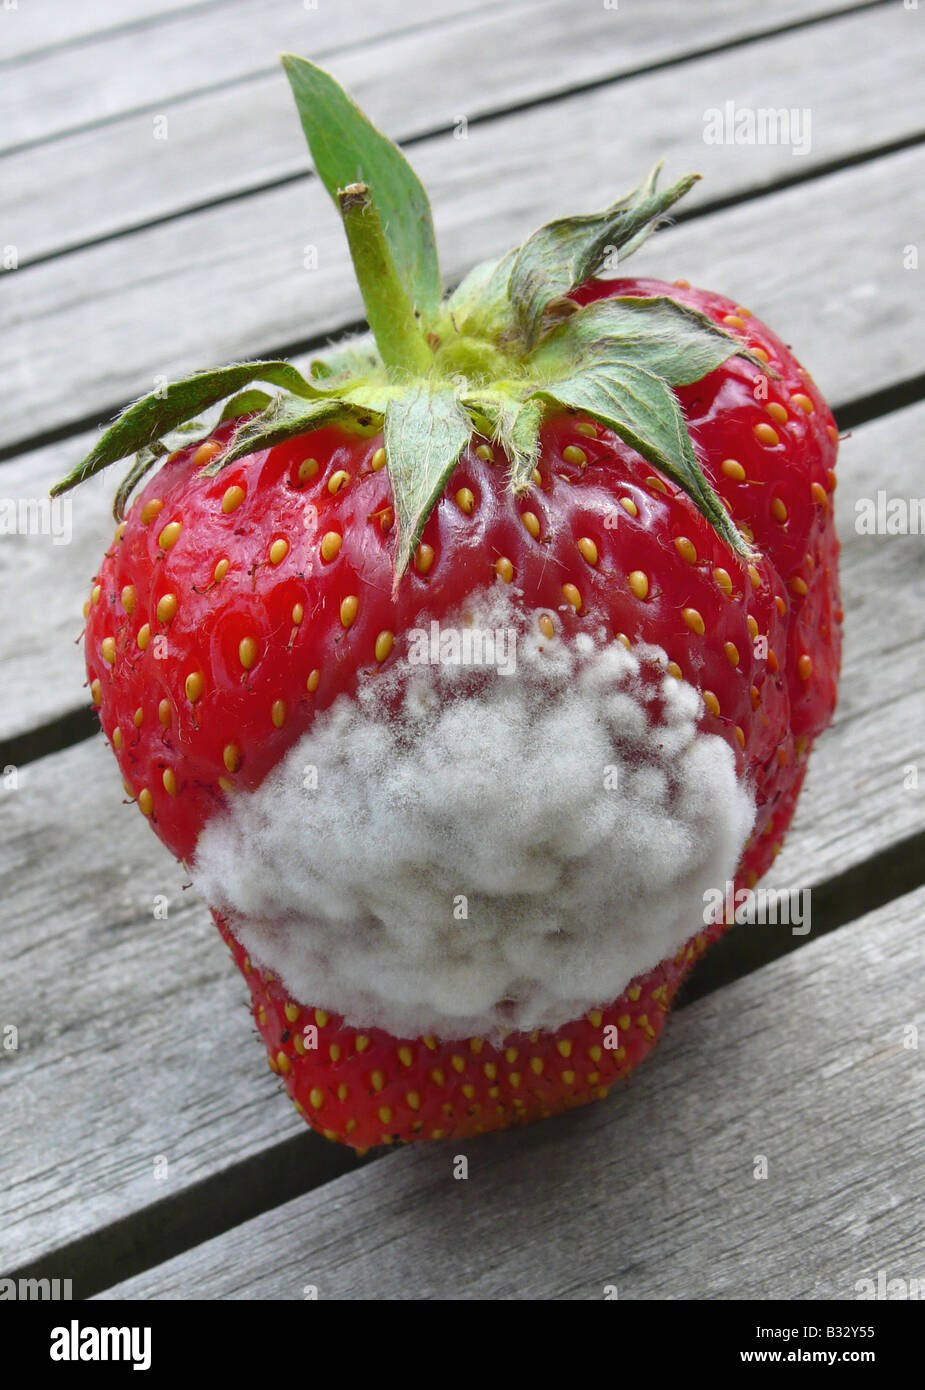 Strawberry with mold 9436934 Stock Photo at Vecteezy